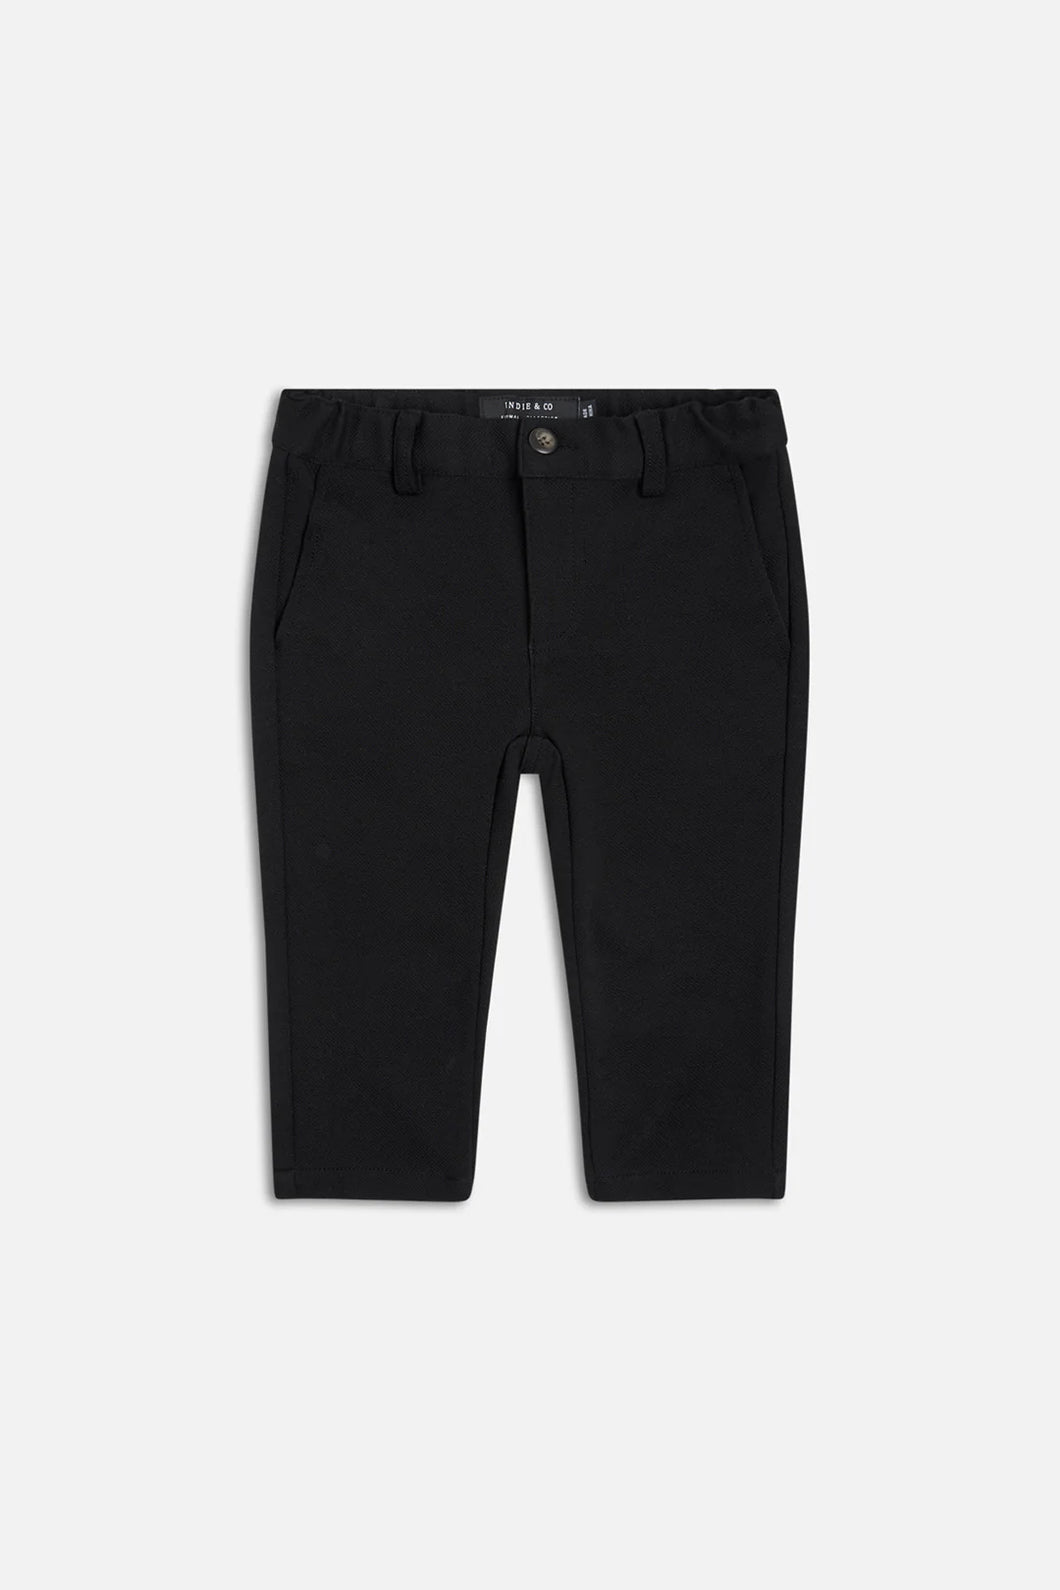 The Henlow Formal Pants - Black